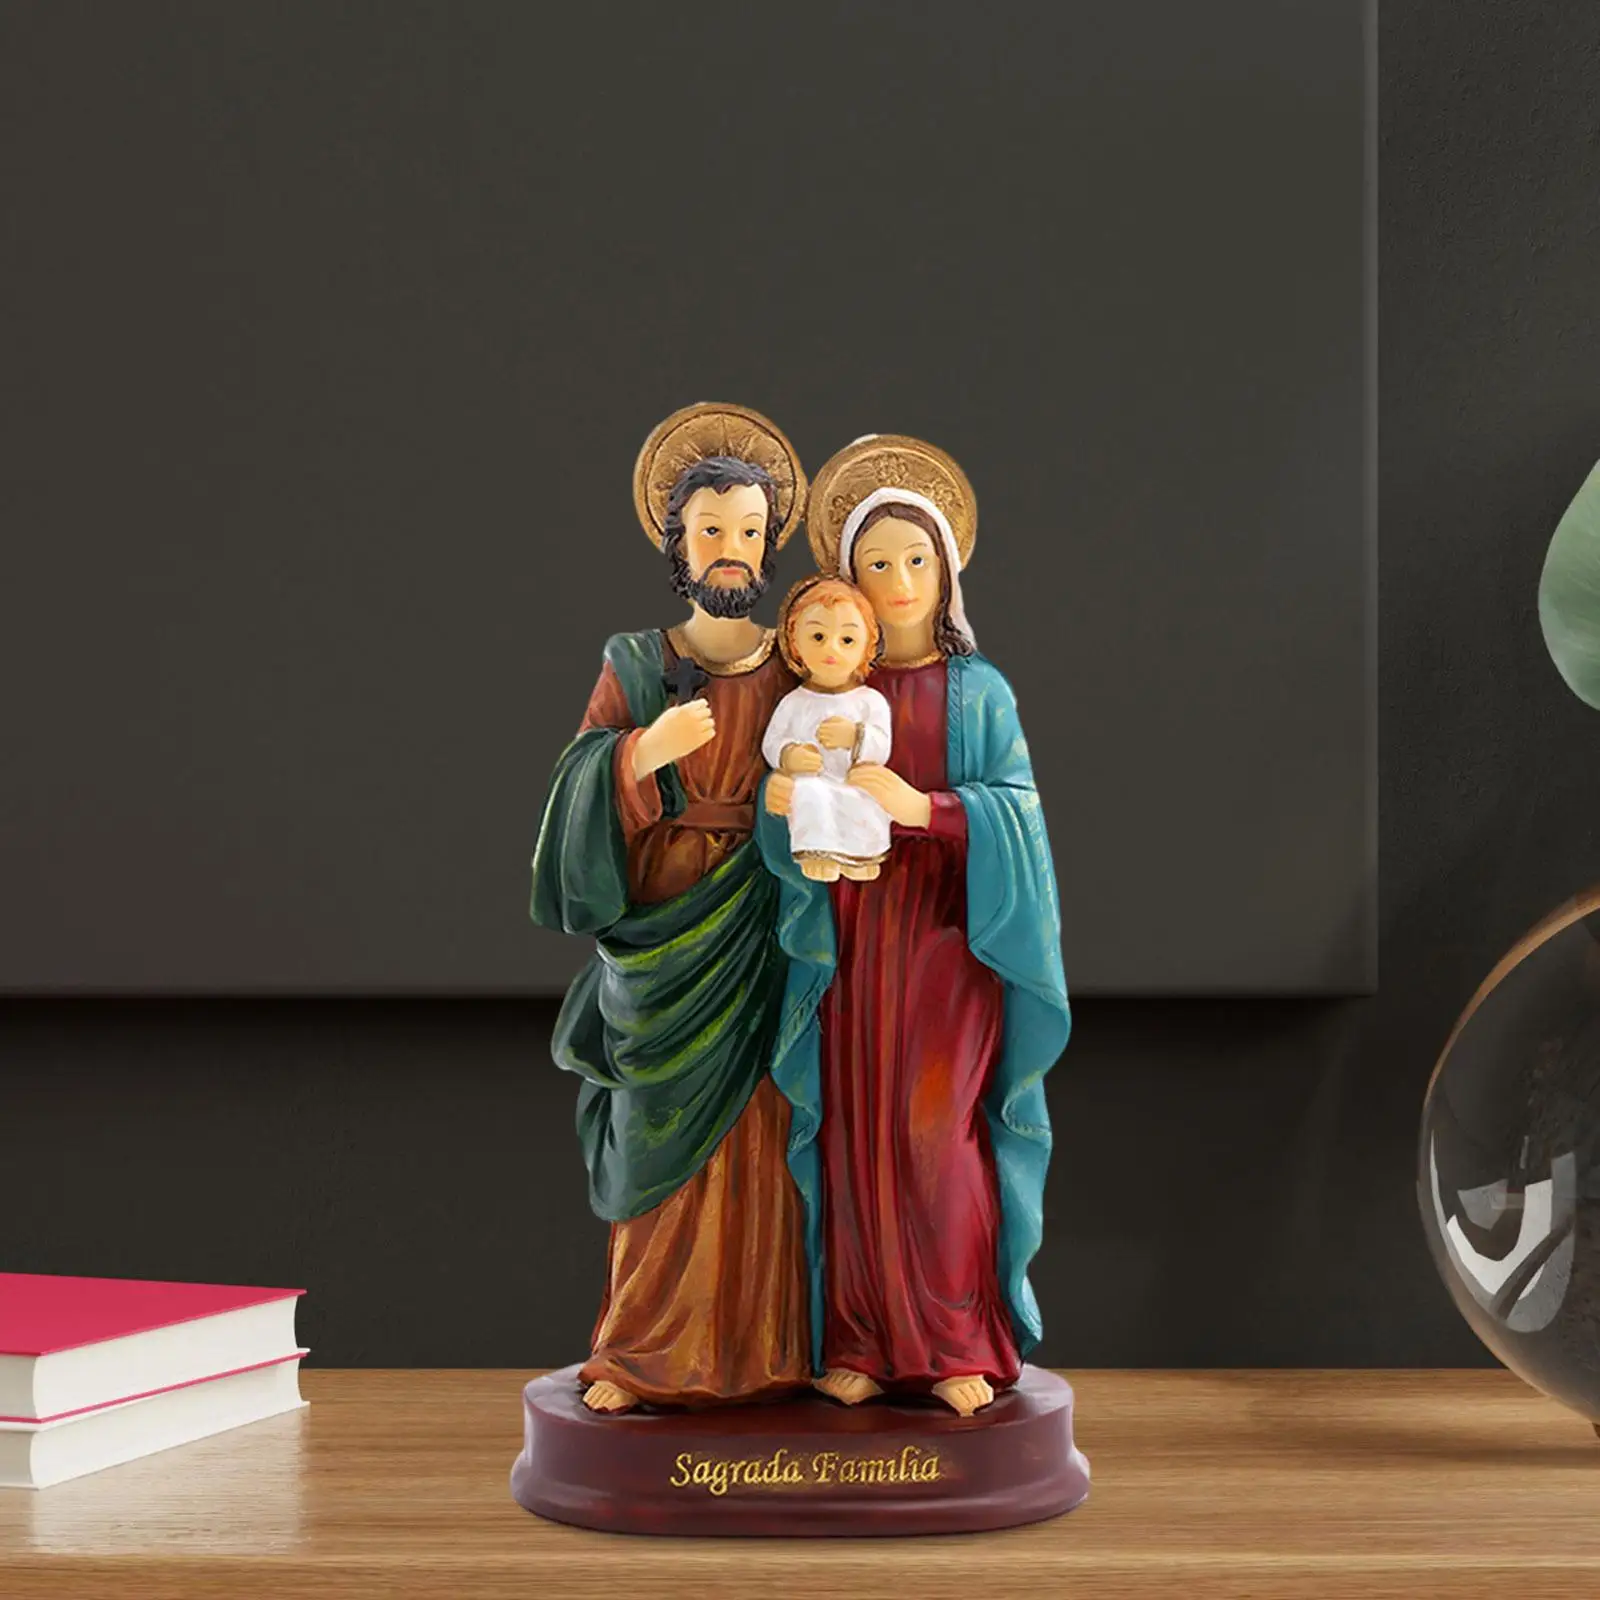 Holy Family Statue Jesus Figurine Art Collectible Nativity Scene Mary Joseph Figures for Shelf Home Living Room Decoration Gift